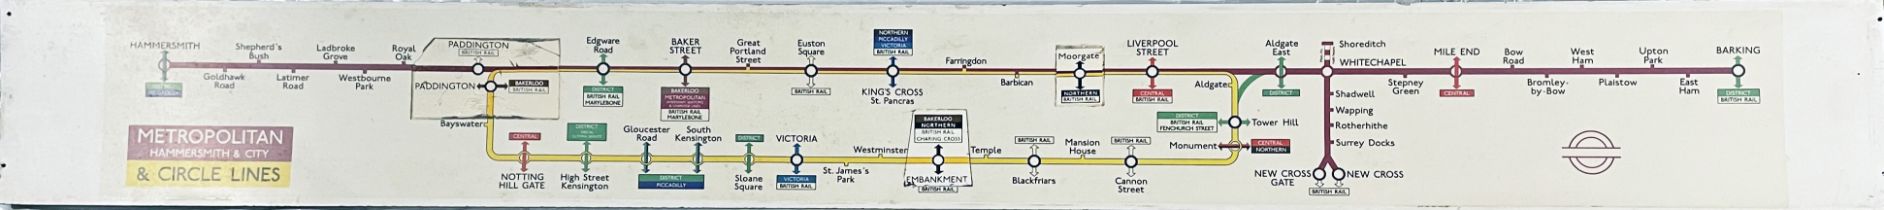 1970s London Underground CAR DIAGRAM (route map) for the Metropolitan (Hammersmith & City) and